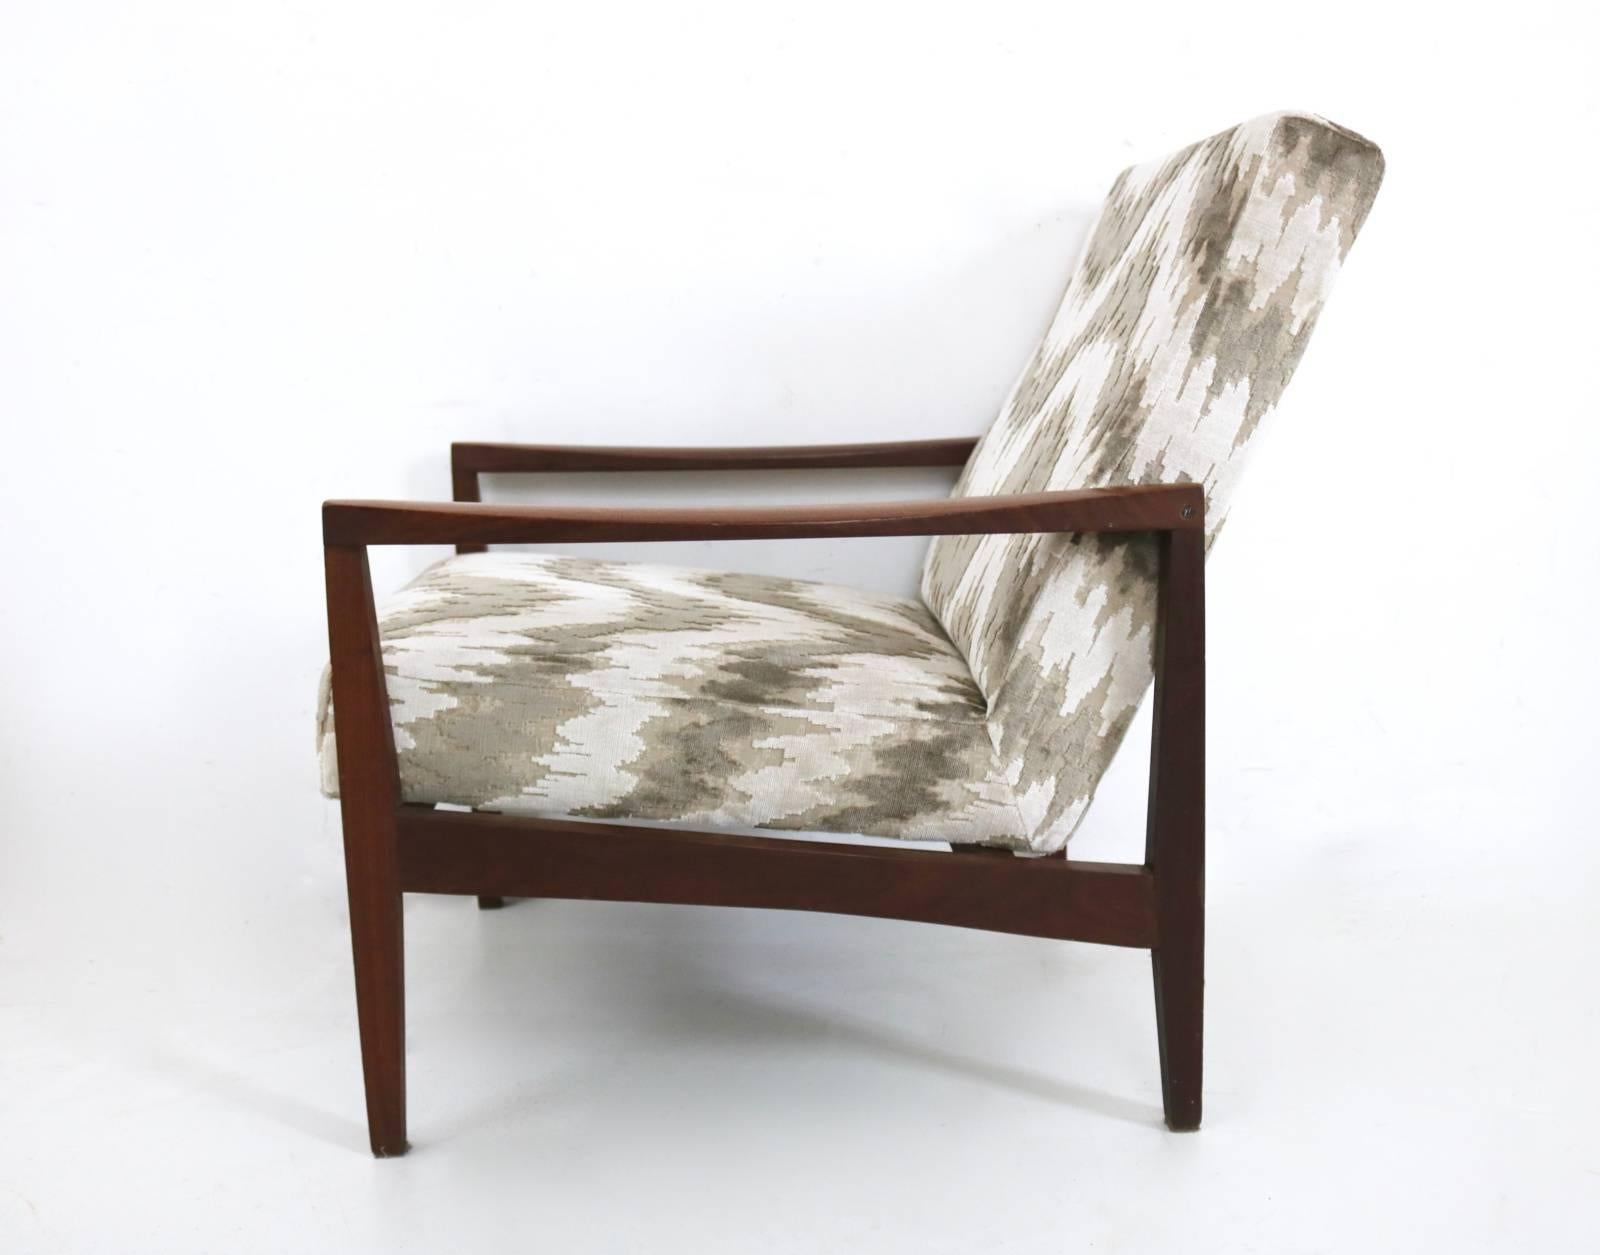 Italian Pair of Midcentury Wood and Patterned Beige and White Fabric Armchairs, Italy